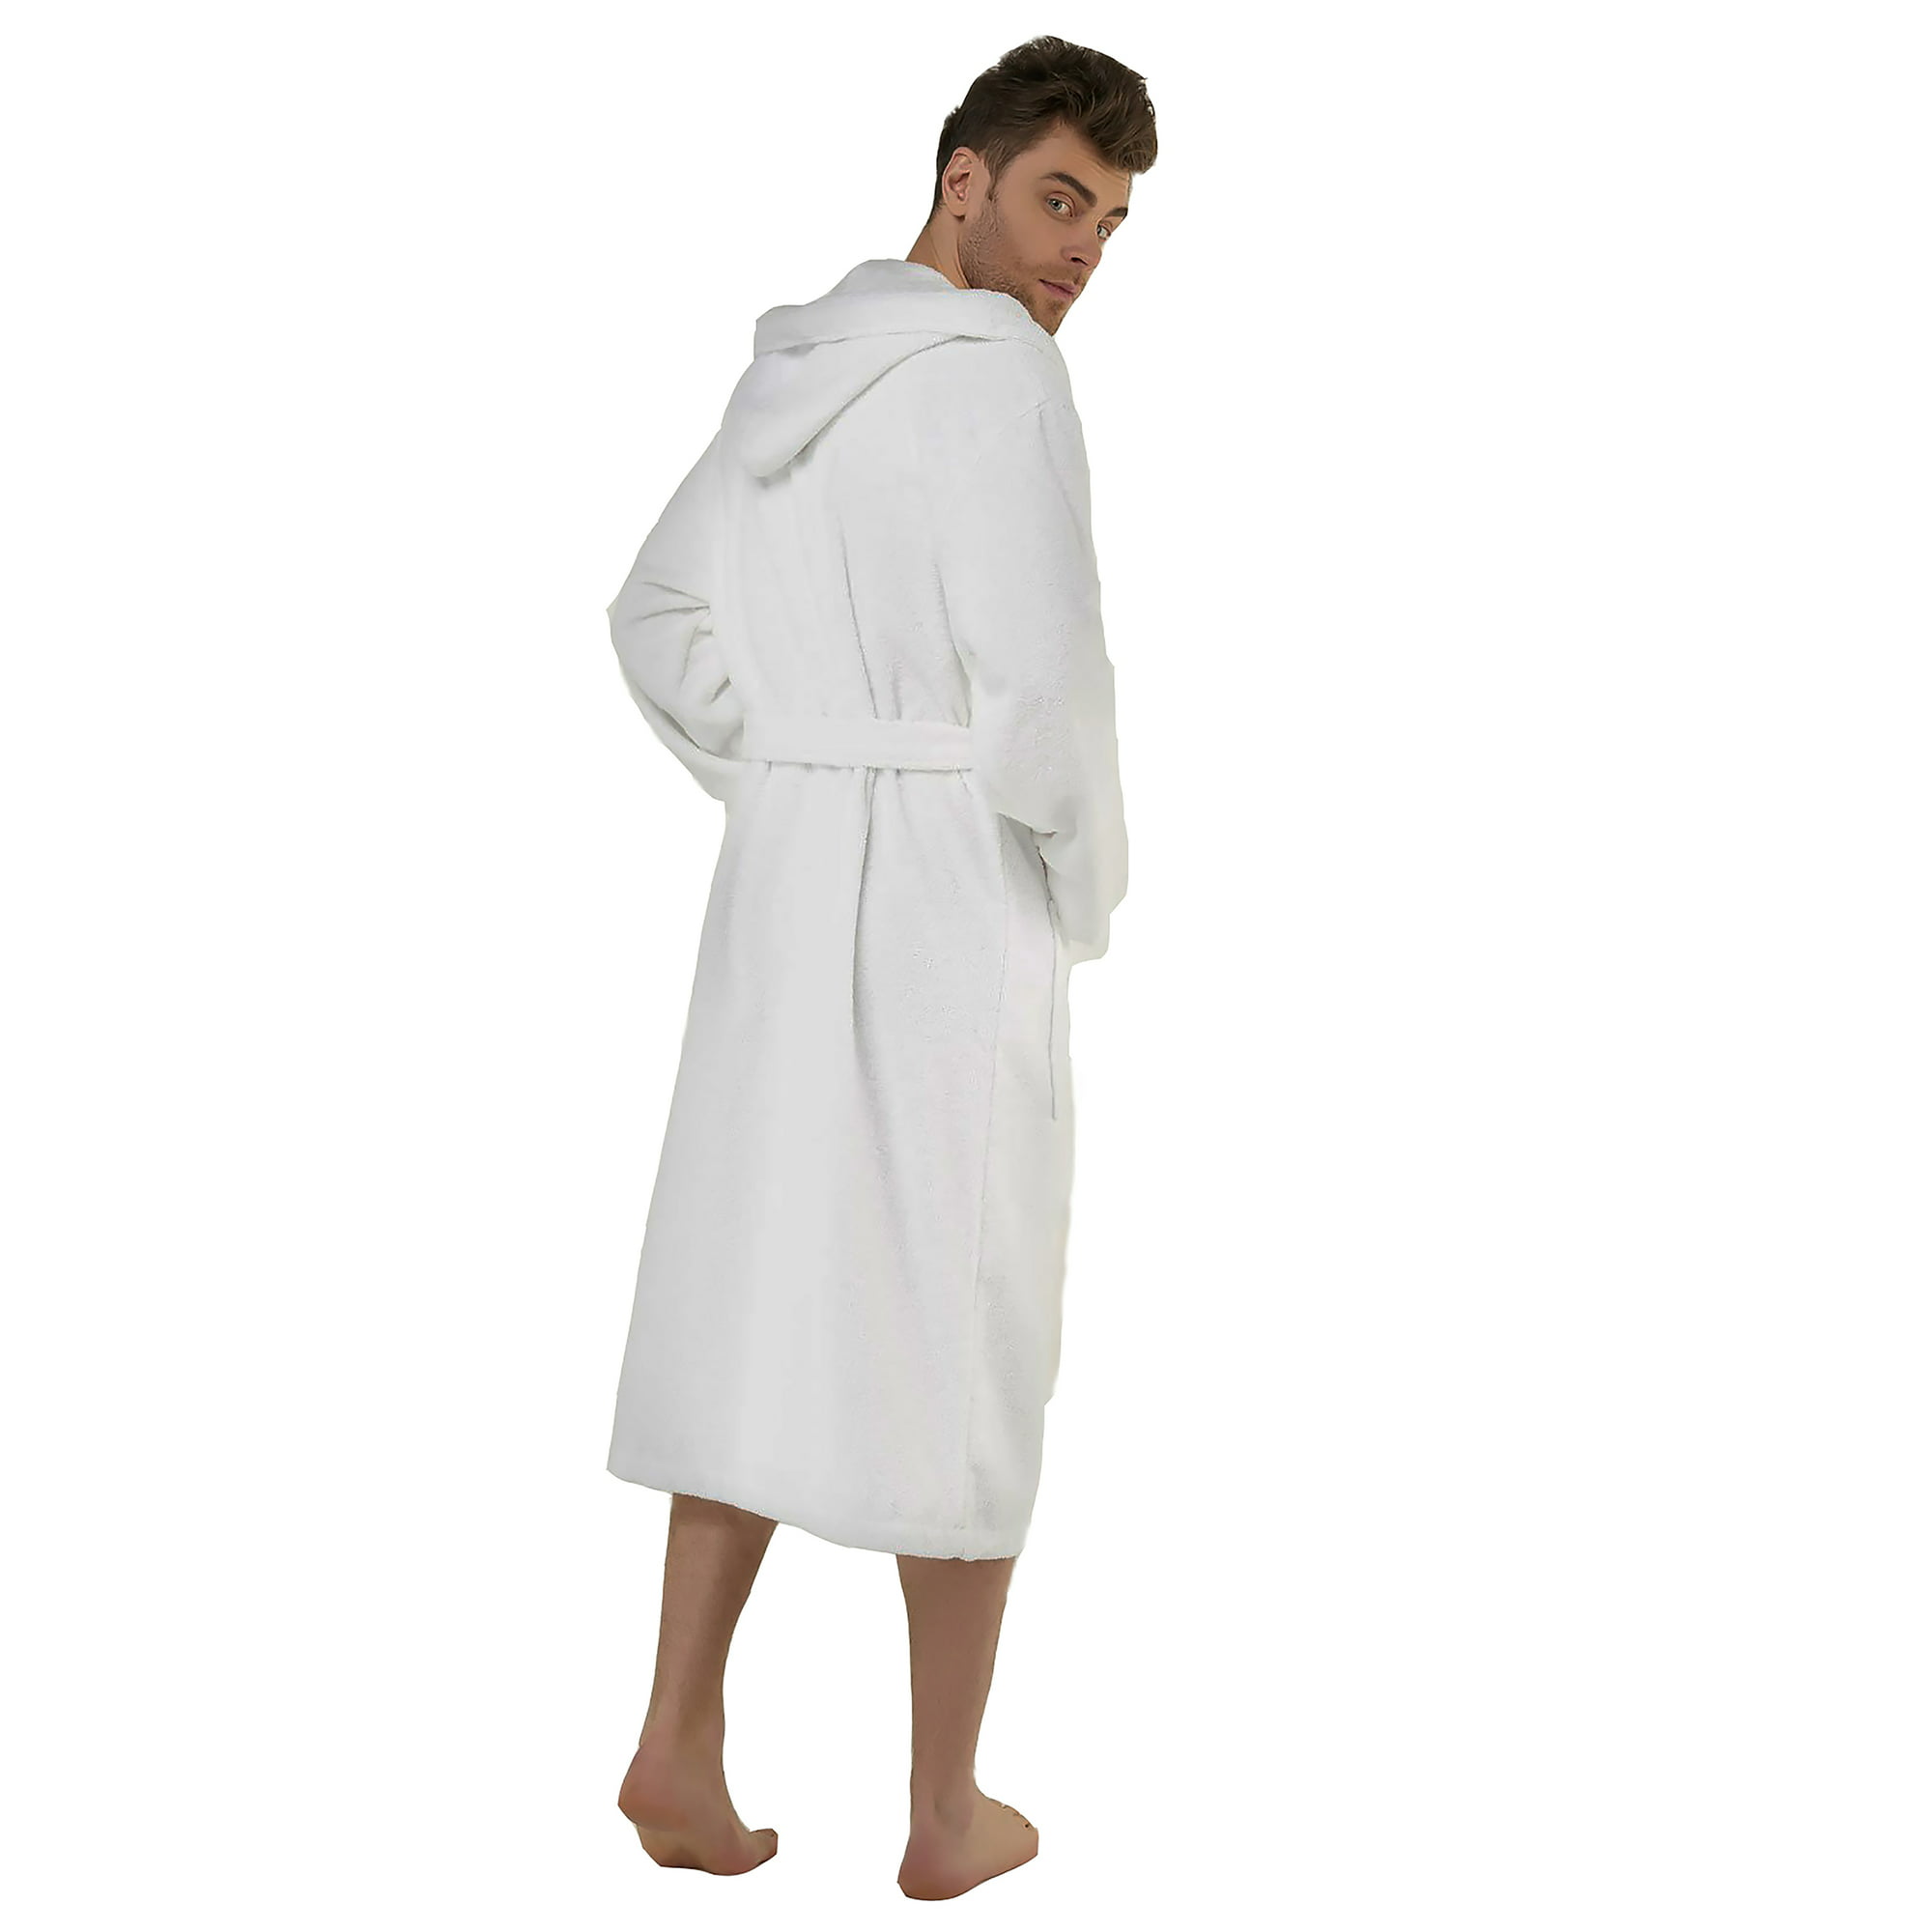 Spa & Resort Sales White Hooded Spa Robe for Men, Full Length,  Long Sleeves, Fist most Medium, Large and XL Sizes. 